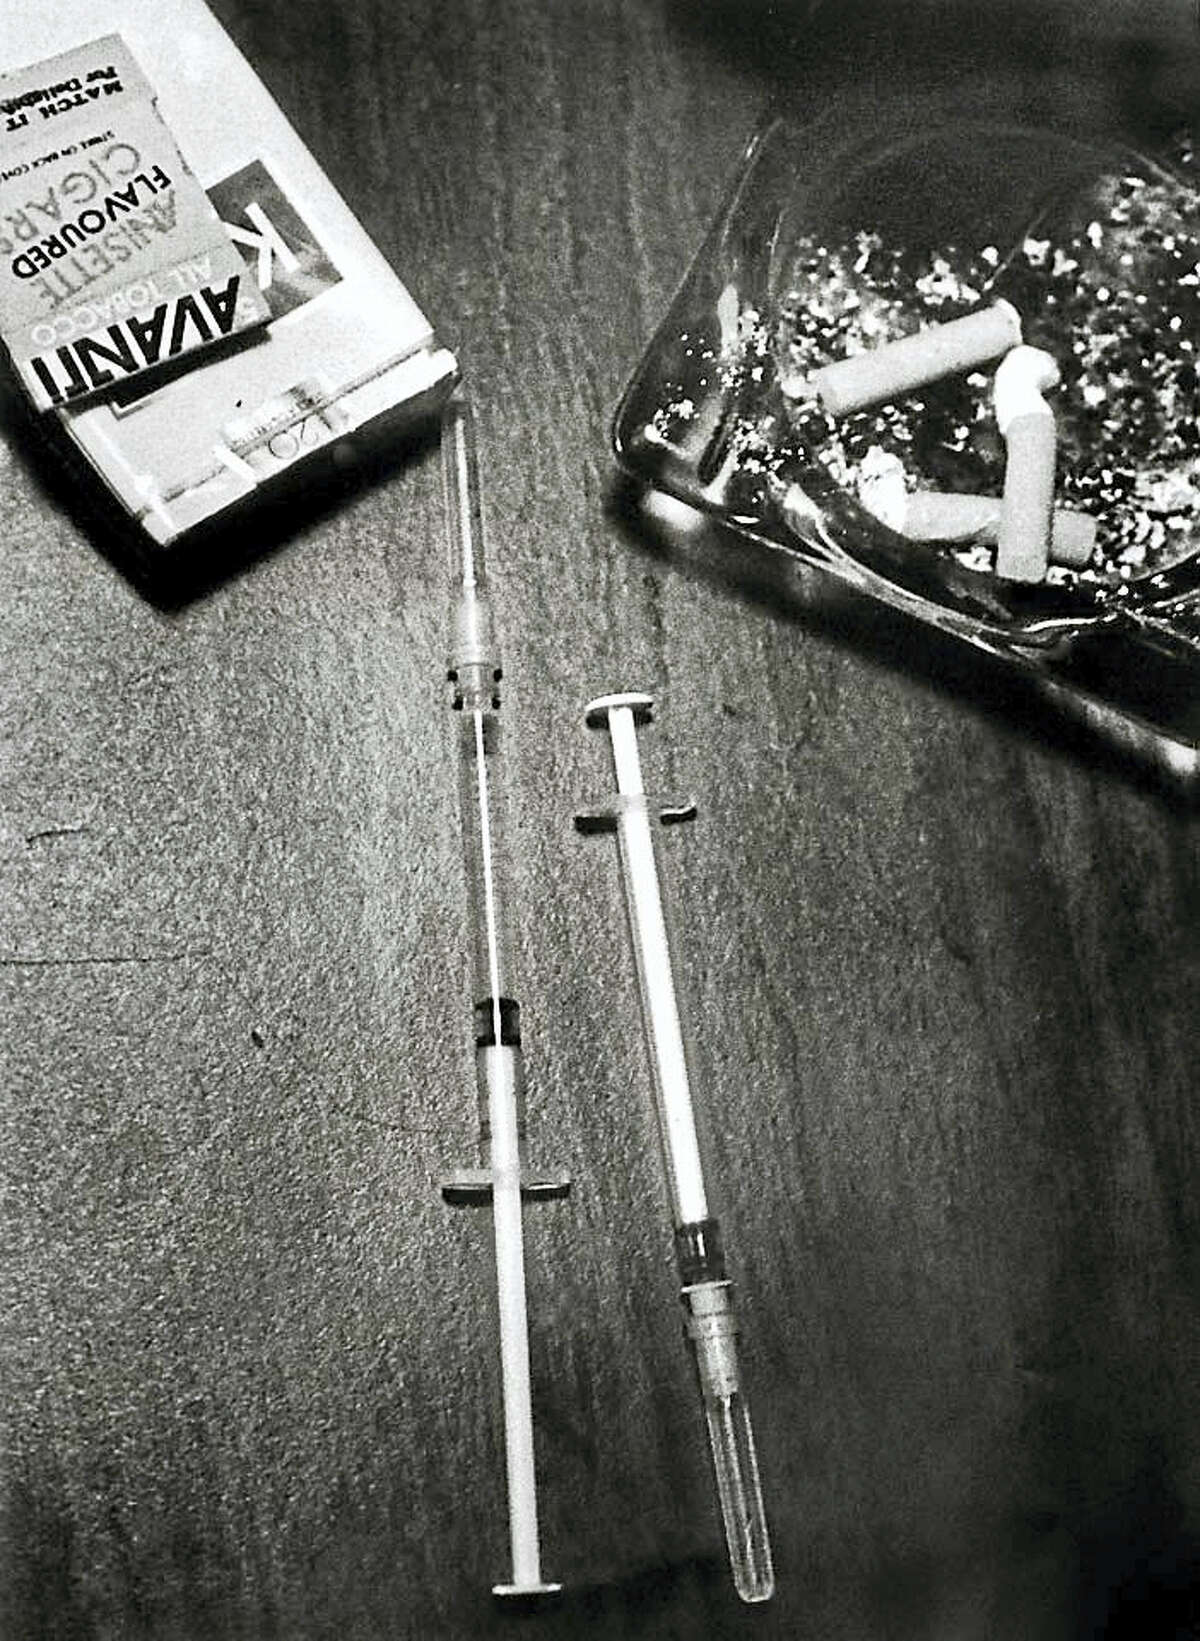 Syringes that will inject a mixture of heroin and cocaine, aka, speedball.